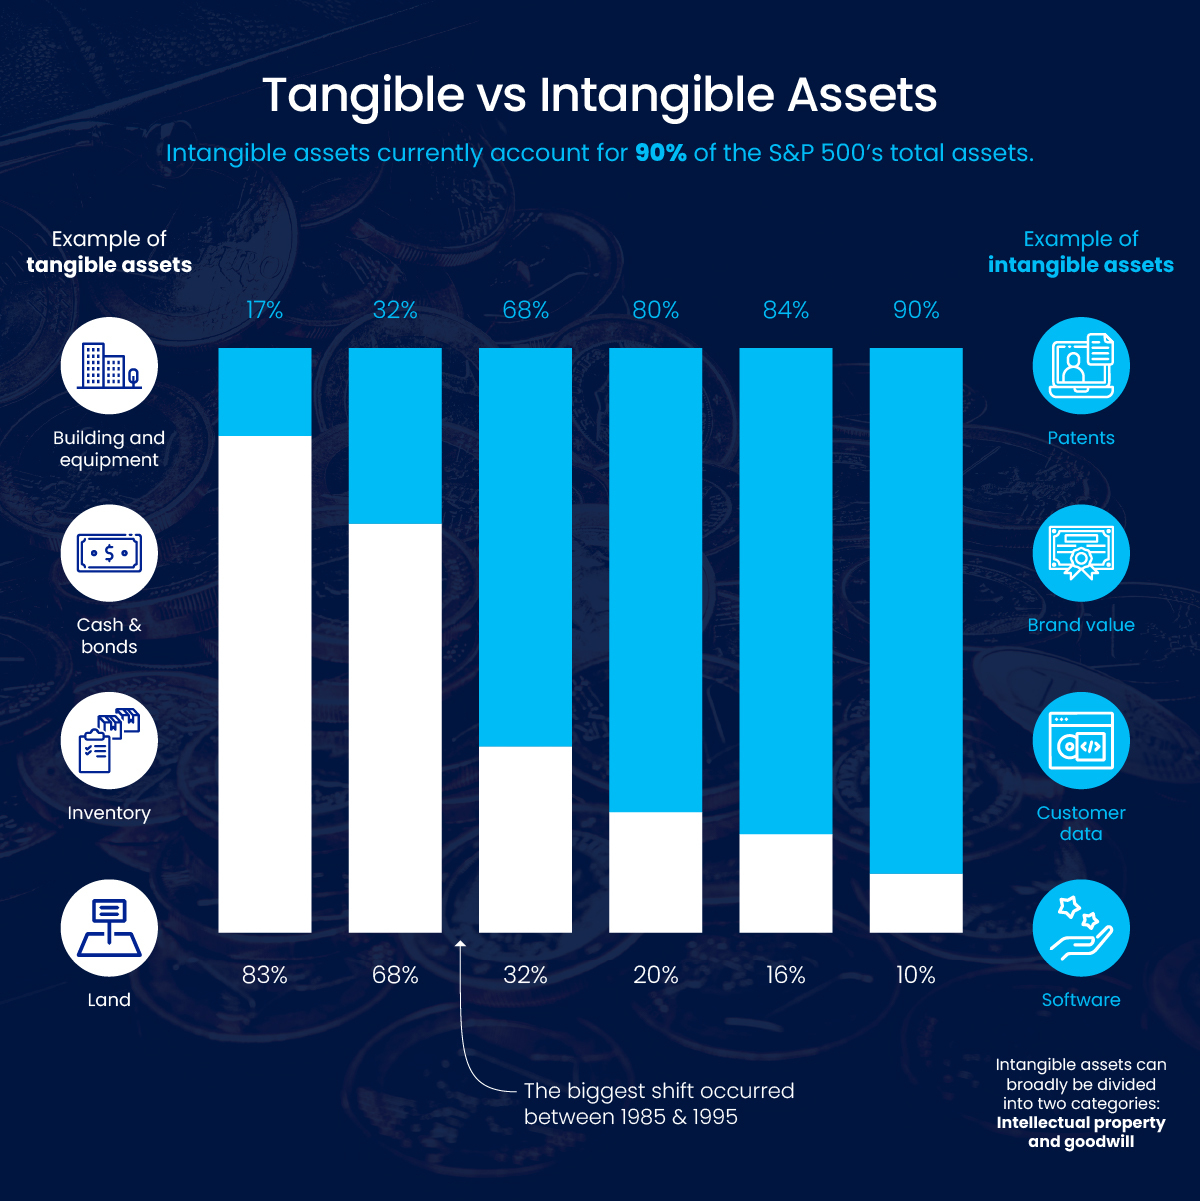 Tangible v. Intangible assets, Ocean Tomo Market Value Study